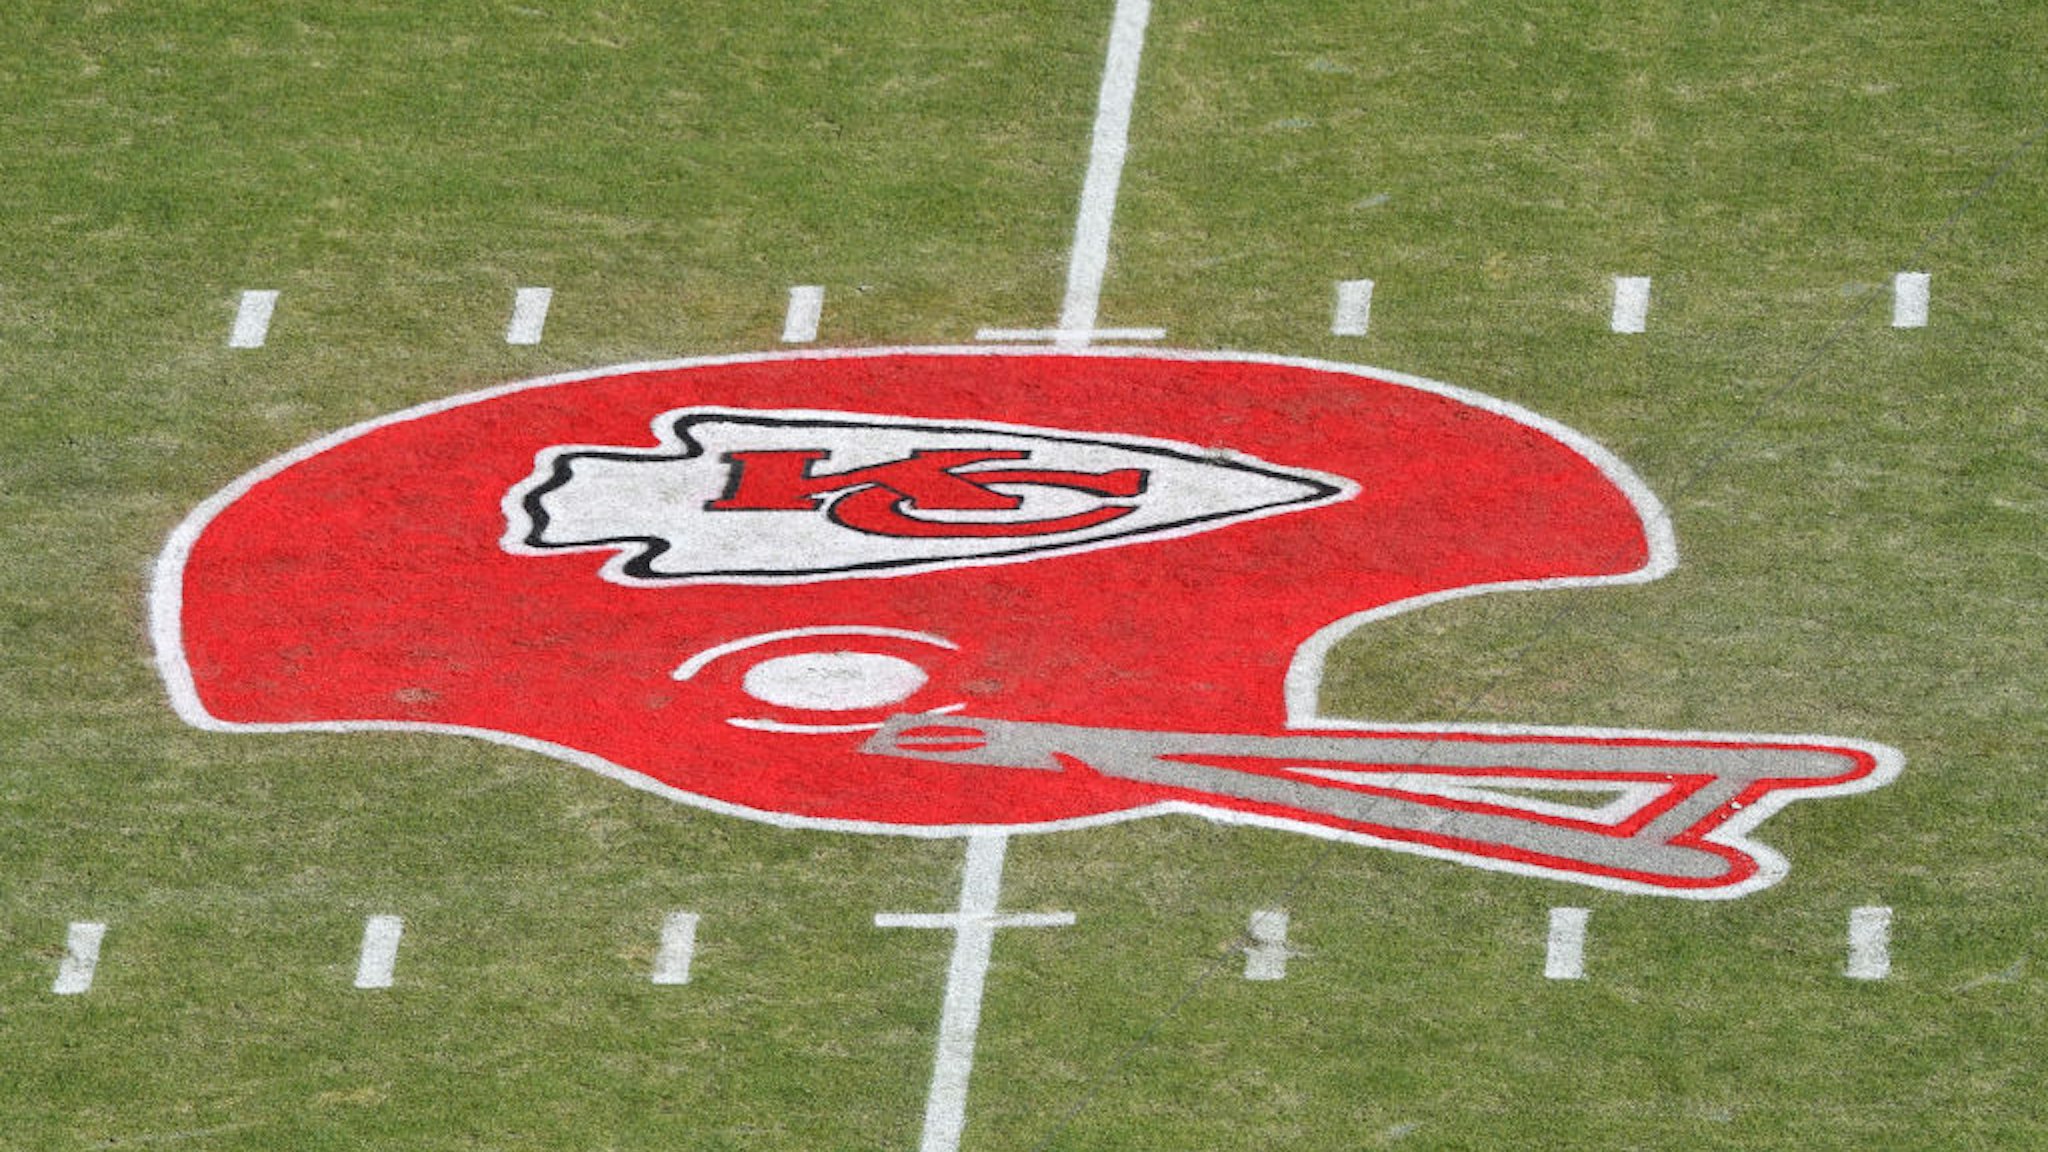 KANSAS CITY, MISSOURI - JANUARY 19: The Kansas City Chiefs helmet logo is seen on the field before the AFC Championship Game between the Kansas City Chiefs and the Tennessee Titans at Arrowhead Stadium on January 19, 2020 in Kansas City, Missouri.